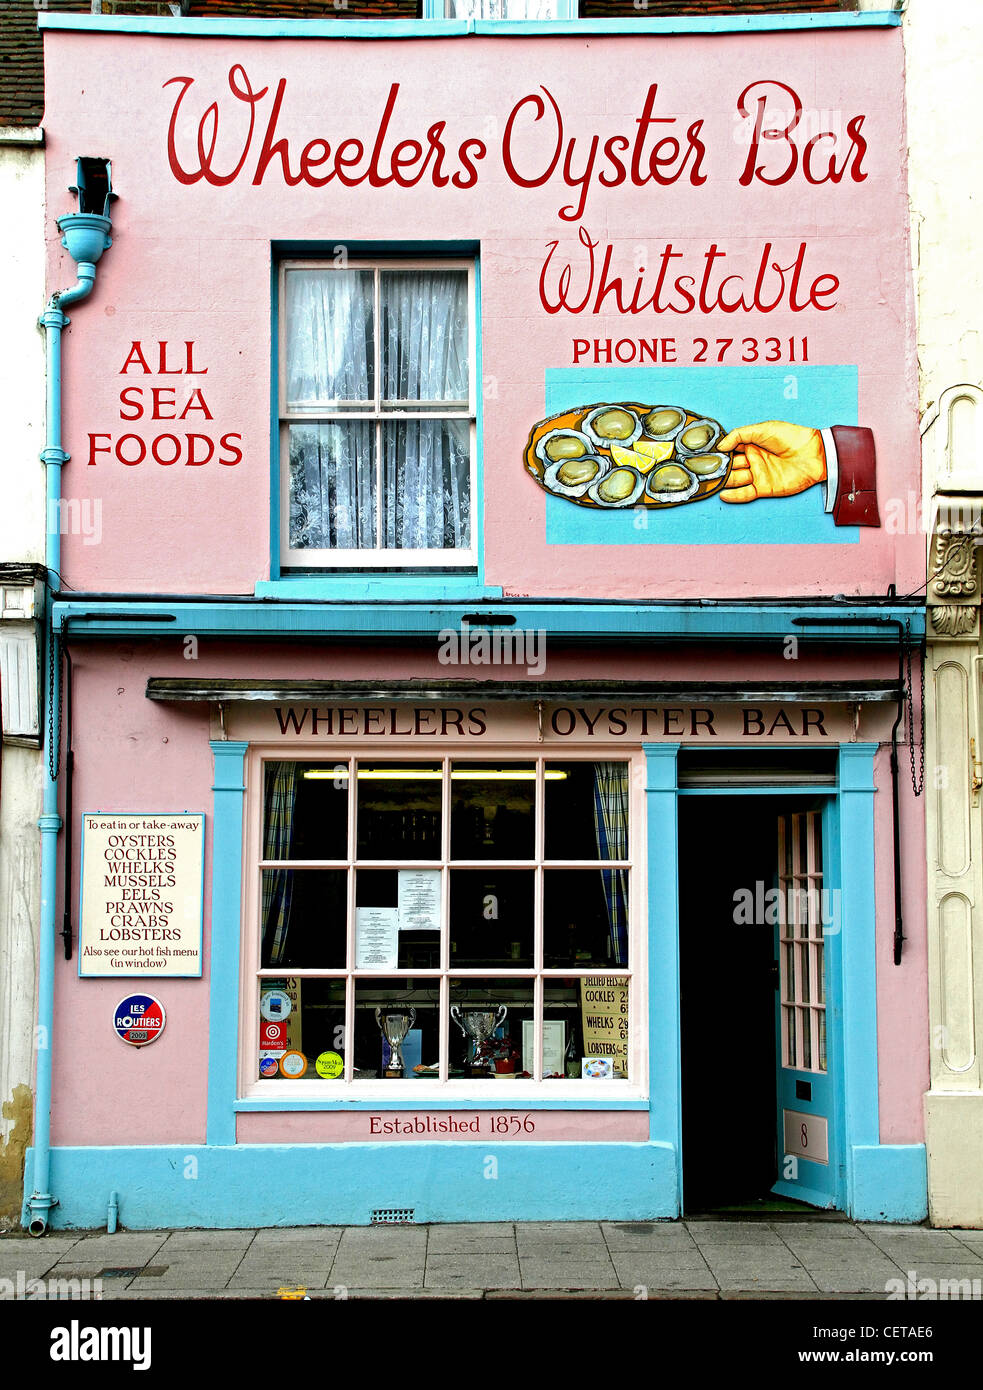 Wheelers Oyster Bar, world famous for its seafood. Stock Photo